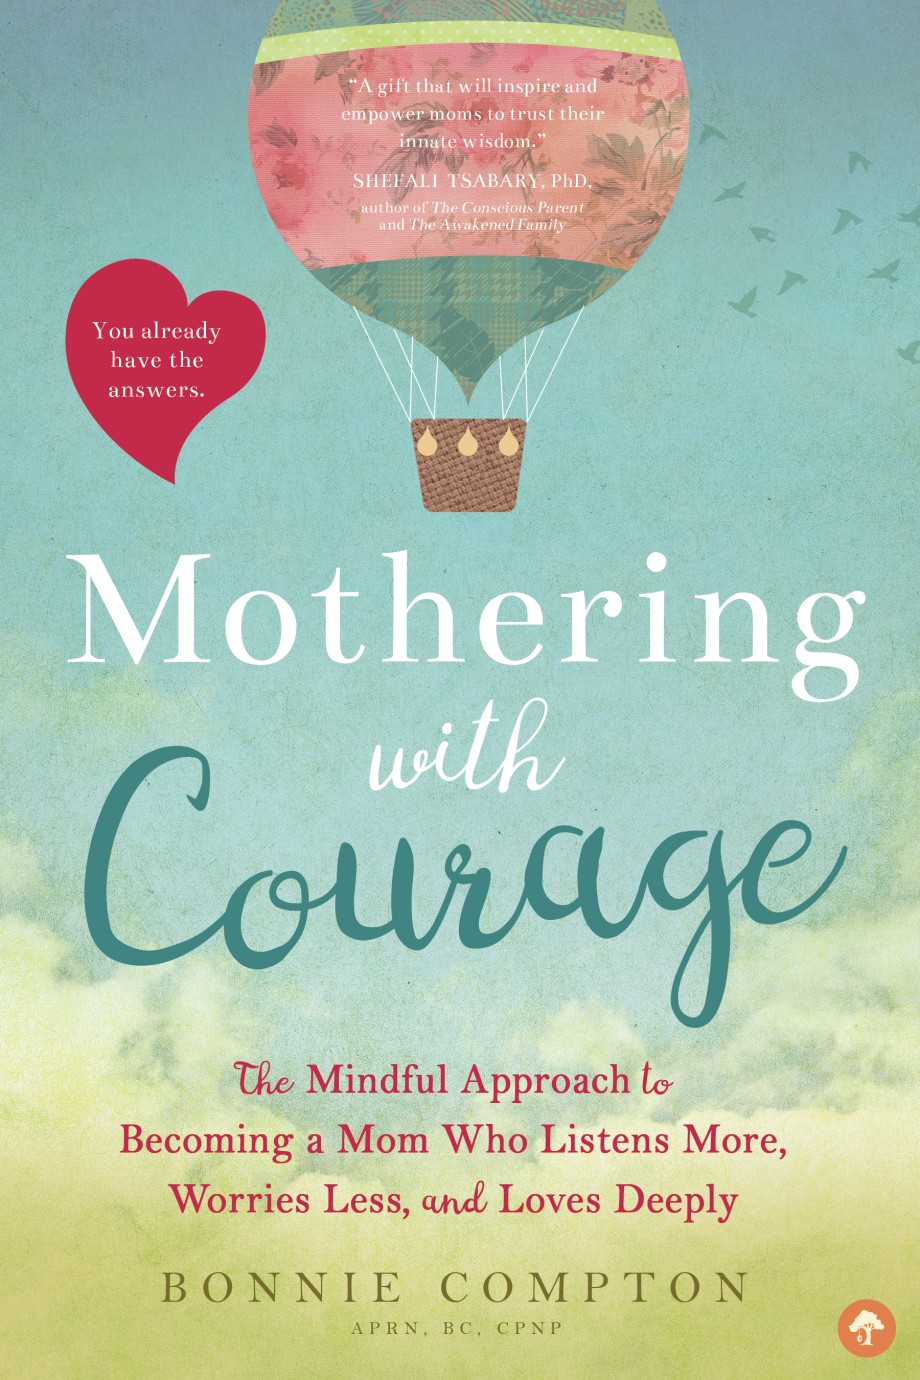 Mothering with Courage The Mindful Approach to Becoming a Mom Who Listens More, Worries Less, and Loves Deeply